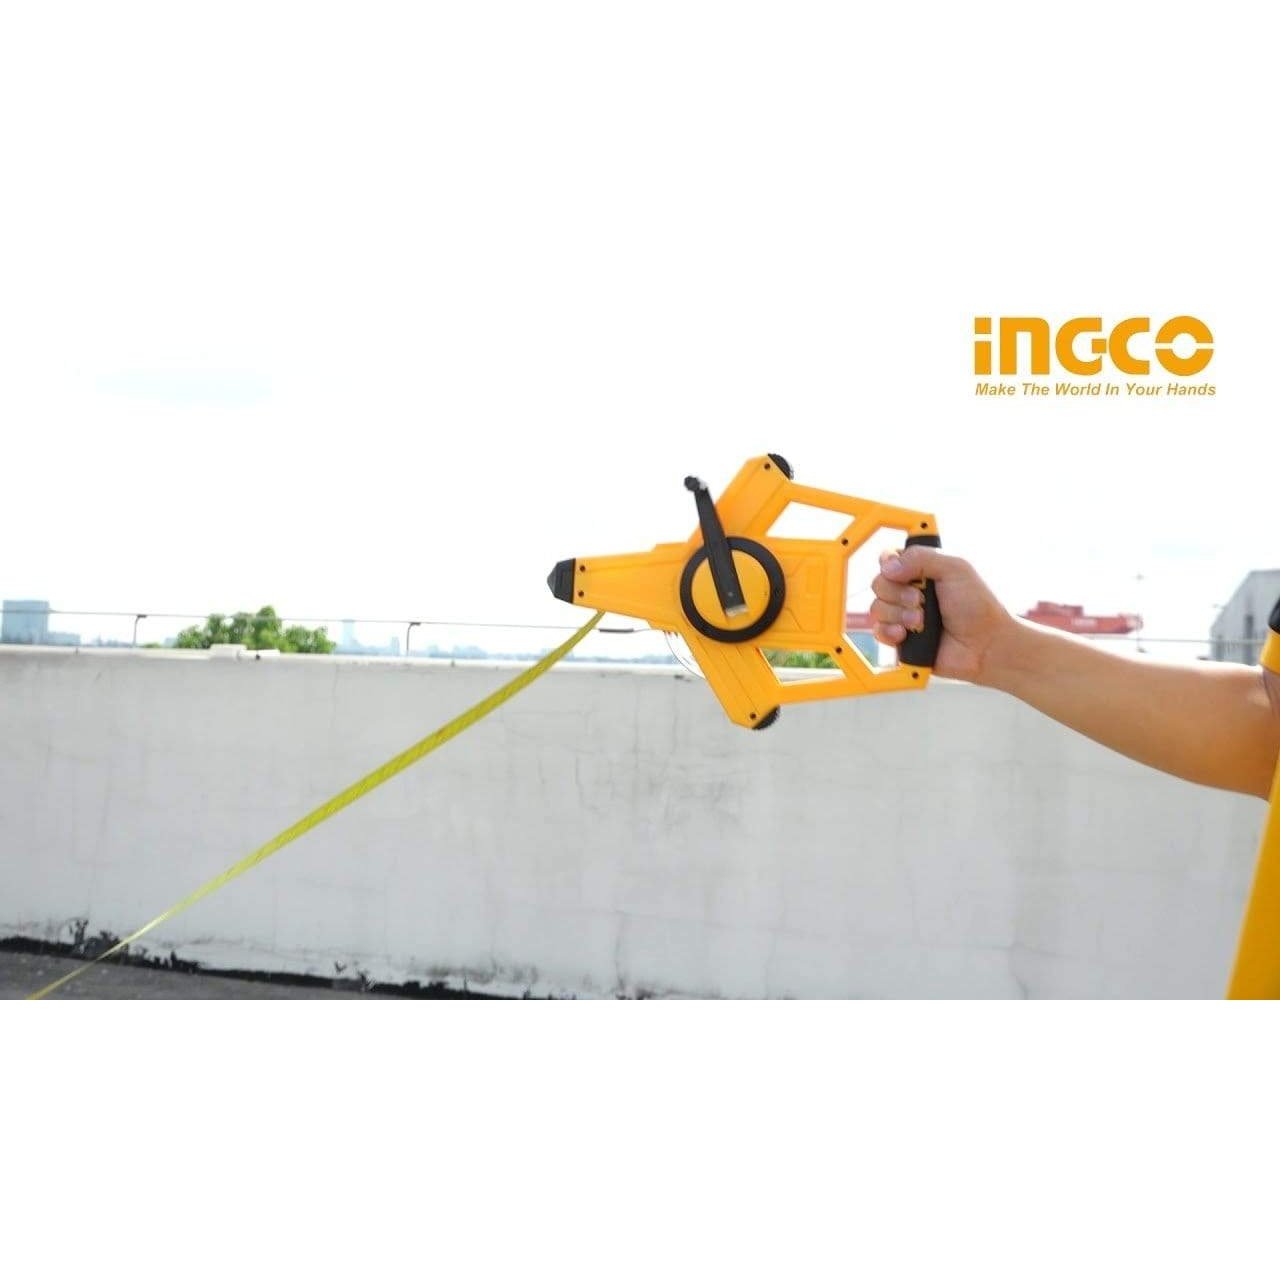 Ingco Fibreglass Measuring Tape, 100m x 12.5mm - HFMT83100 - Buy Online in Accra, Ghana at Supply Master Tape Measure Buy Tools hardware Building materials